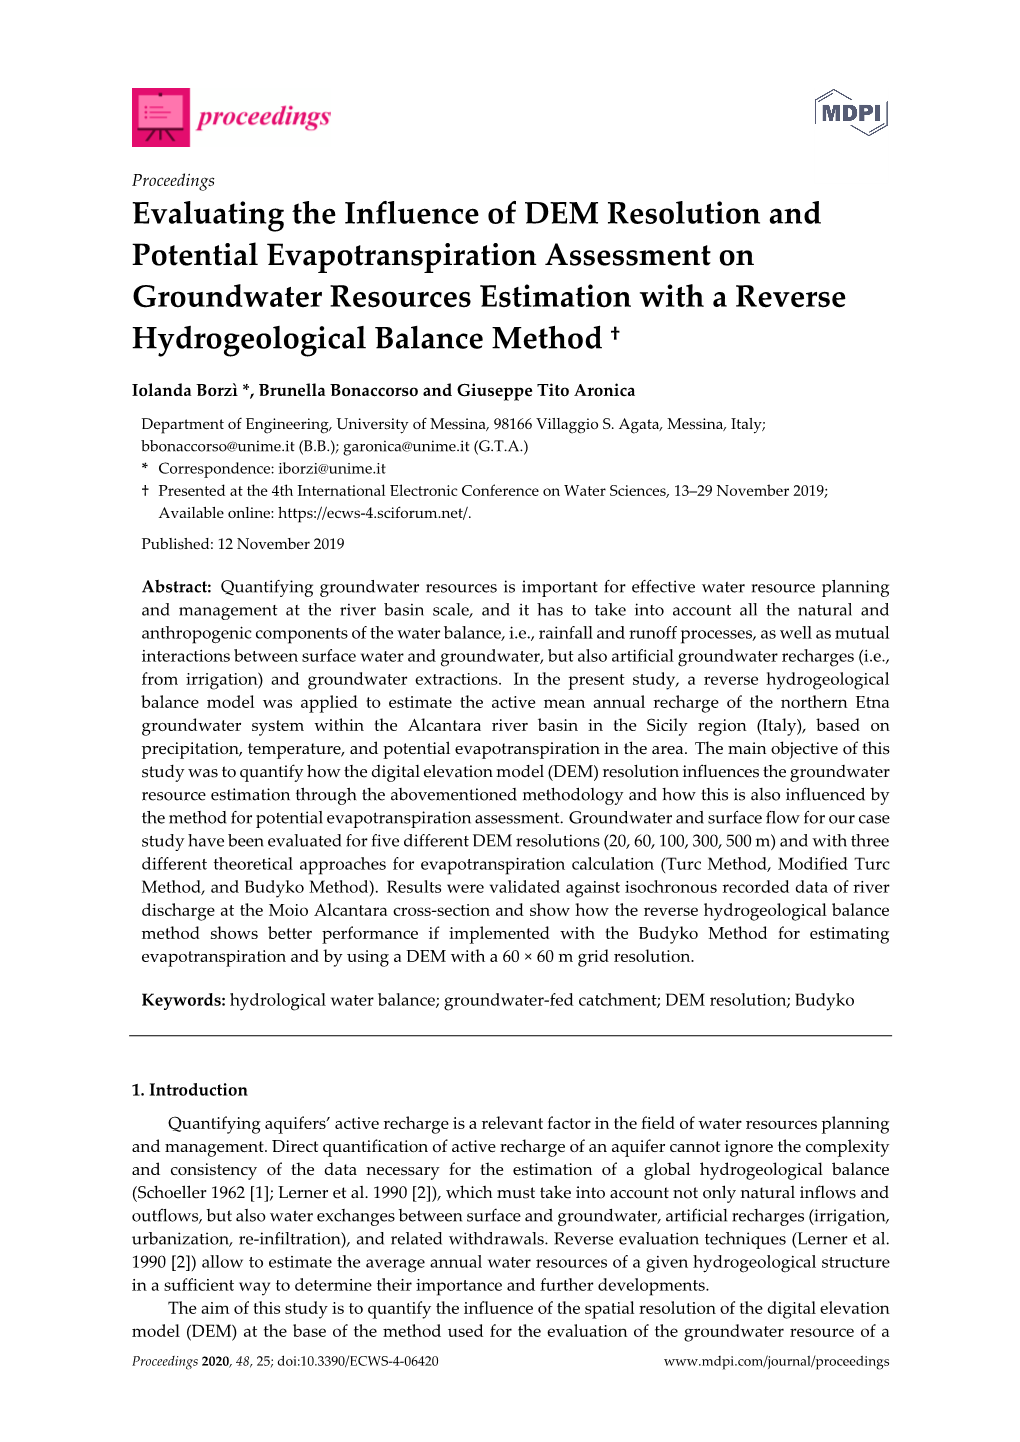 Evaluating the Influence of DEM Resolution and Potential Evapotranspiration Assessment on Groundwater Resources Estimation With